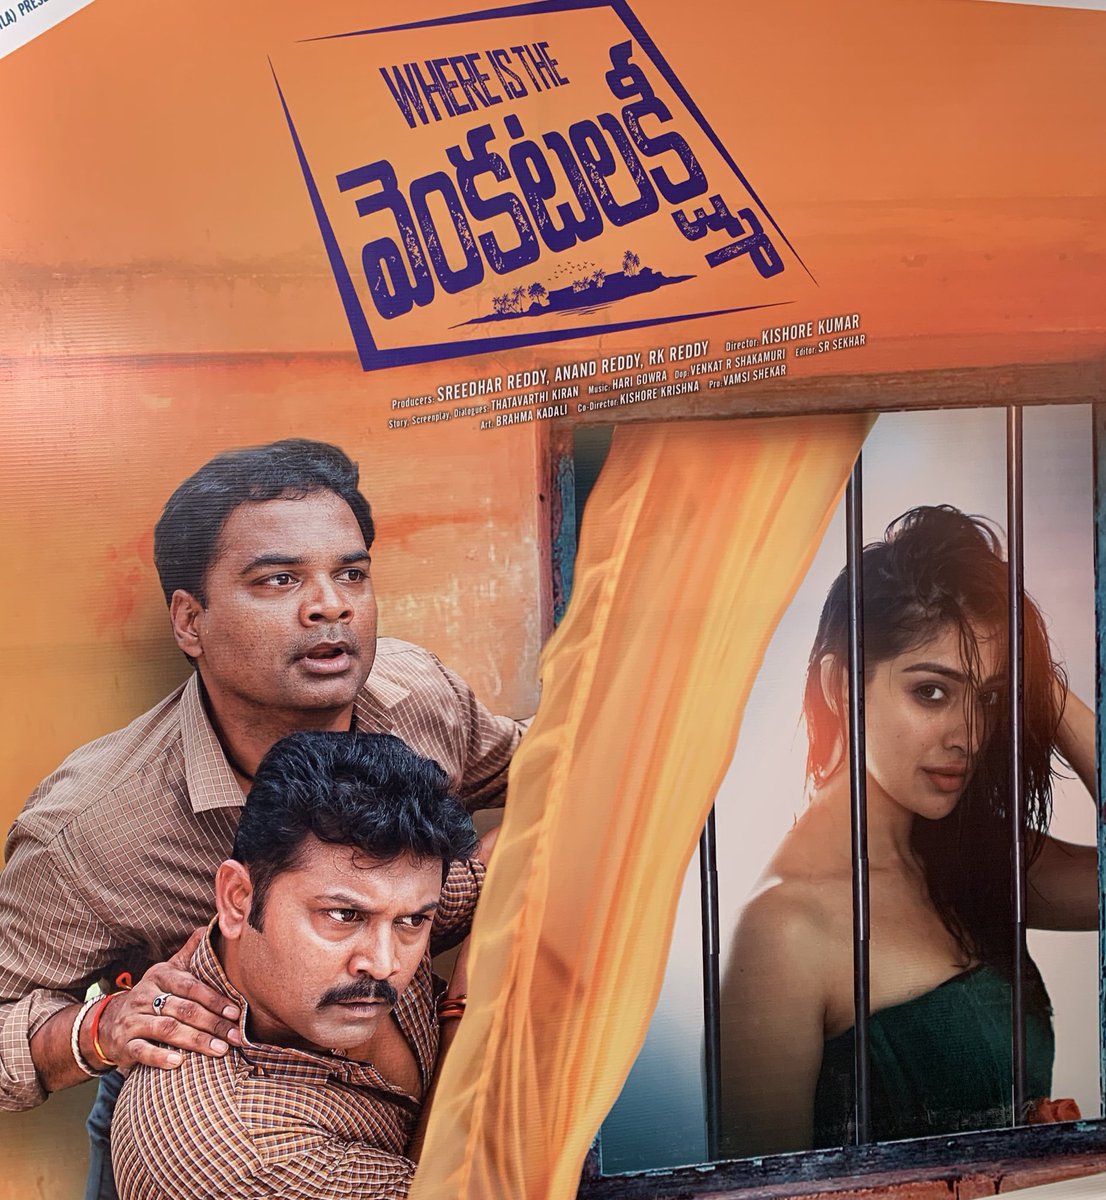 And the trailer is here !!! #WhereIsTheVenkatalakshmi enjoy luvlies thanks for this immense support and love always ❤️❤️❤️ #trailerreleased #comedyfilm #telugu 

youtu.be/Y8HFafKNdCI